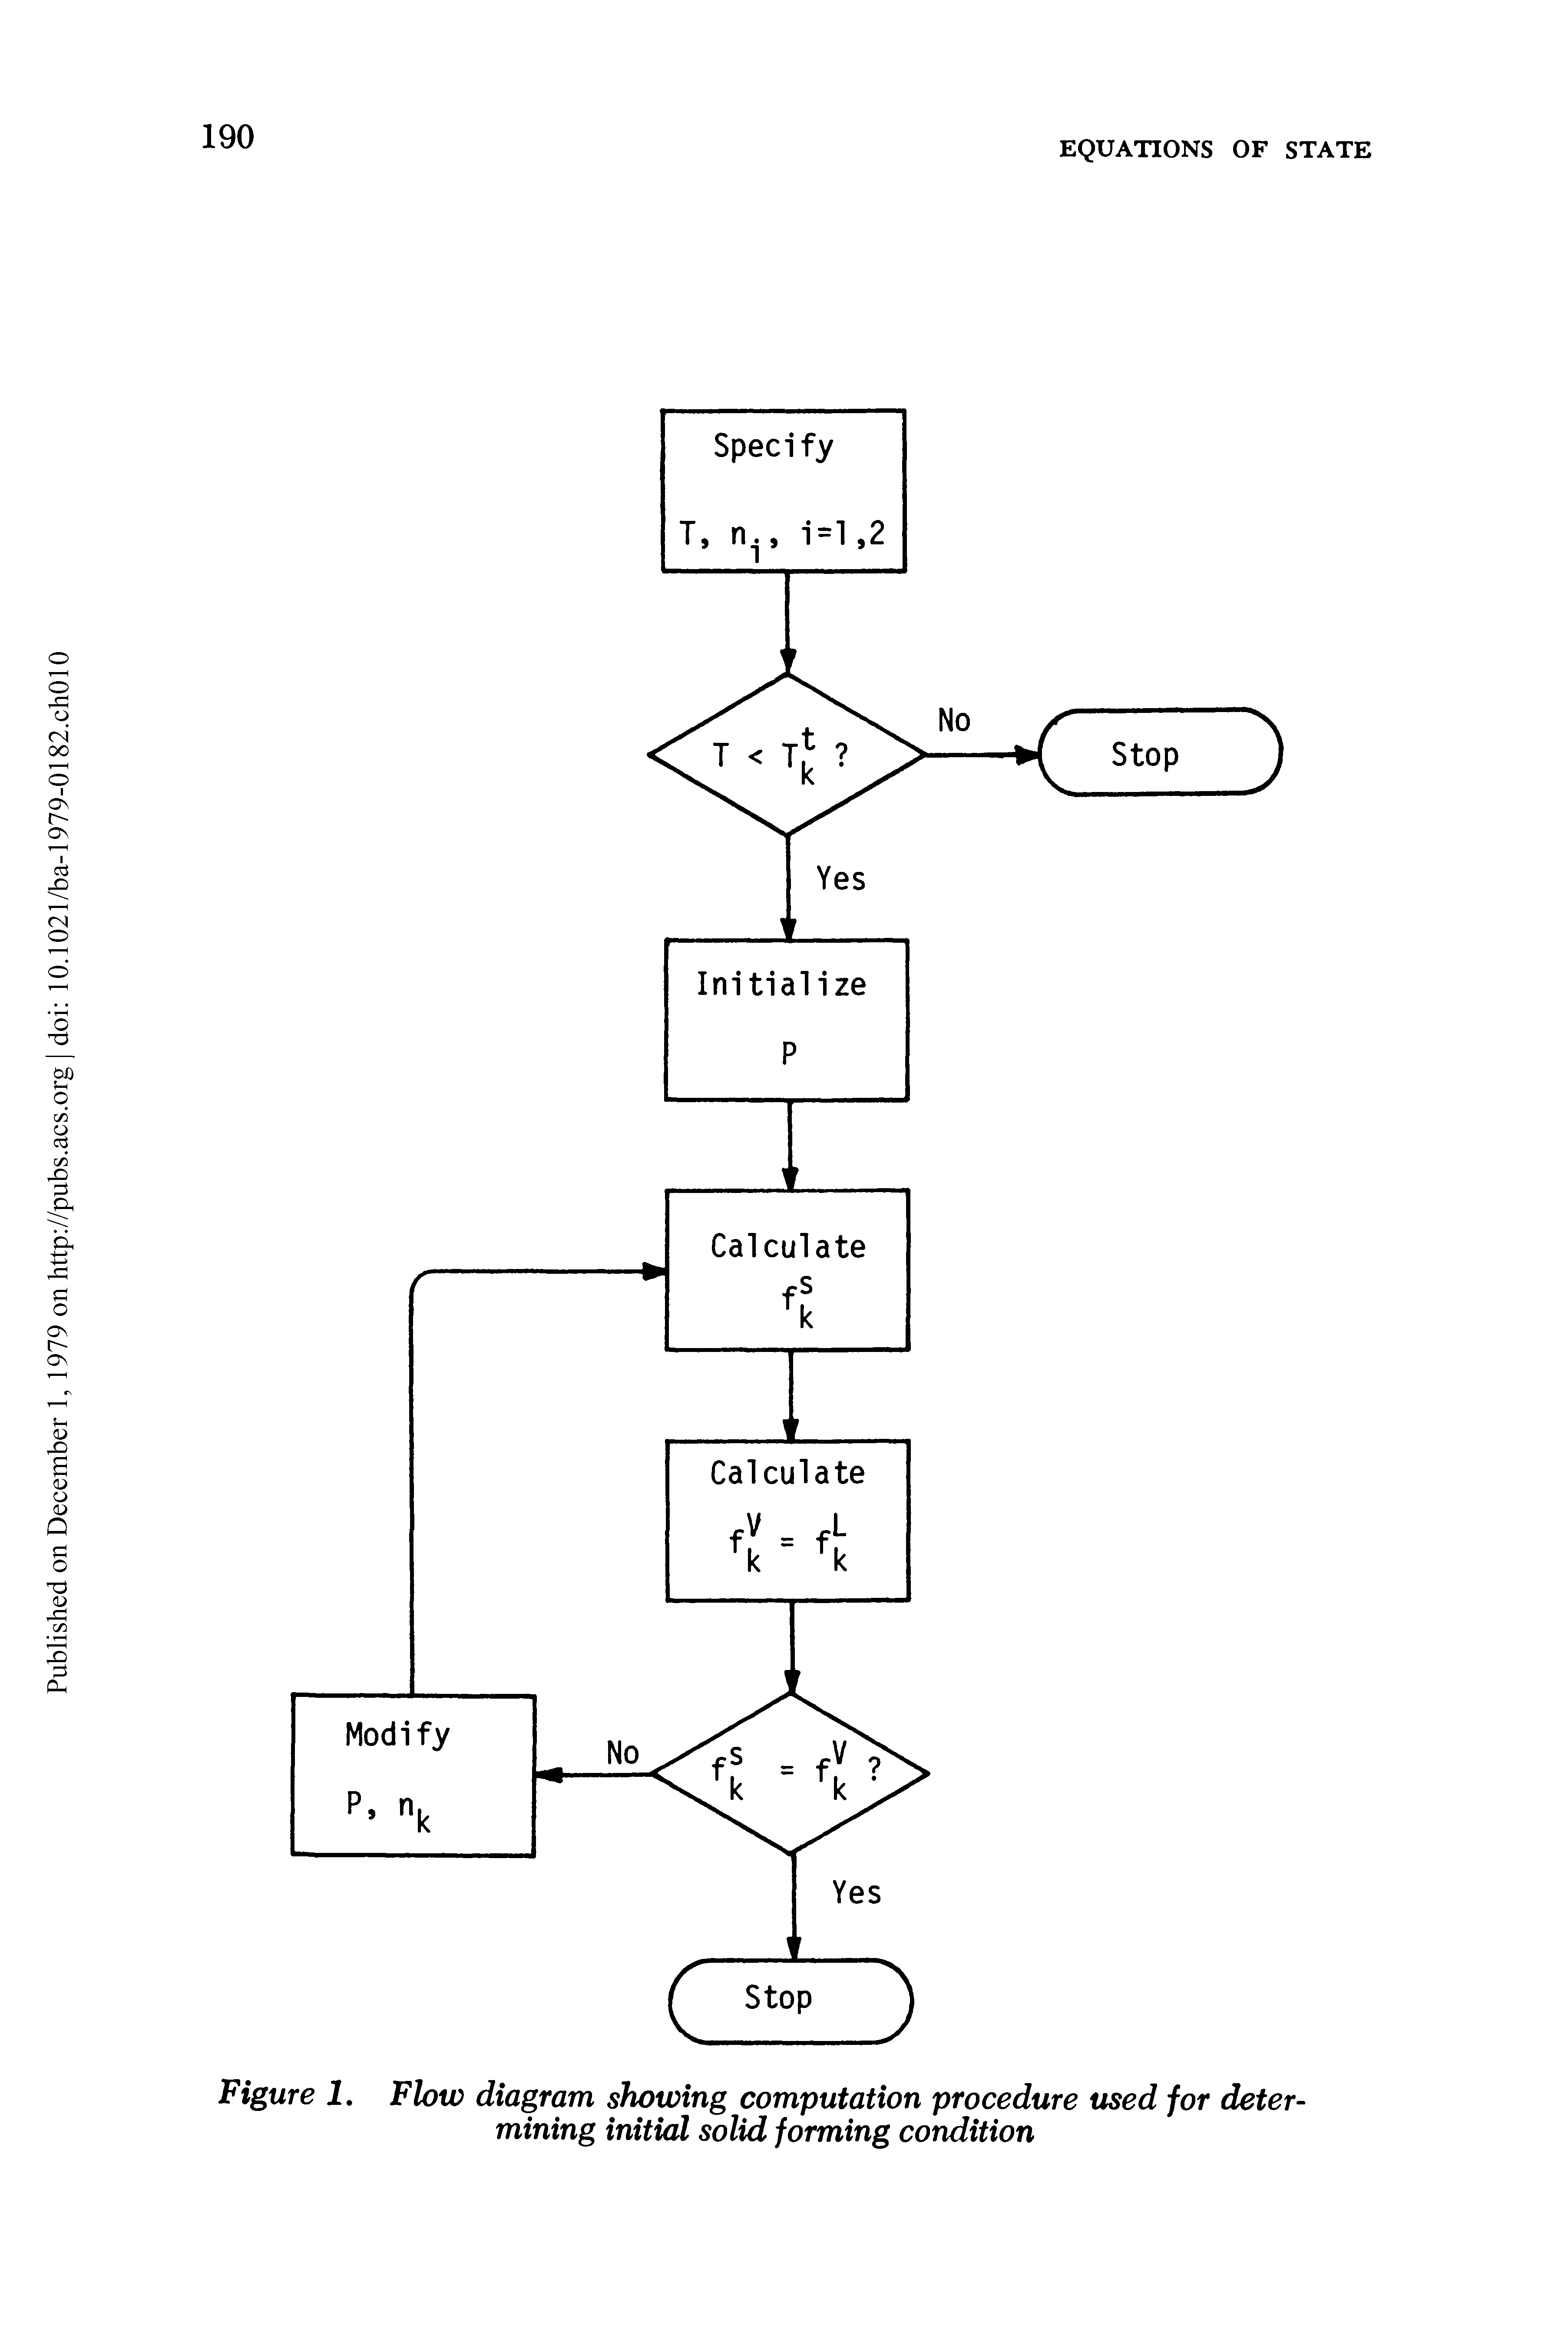 Figure I. Flow diagram showing computation procedure used for determining initial solid forming condition...